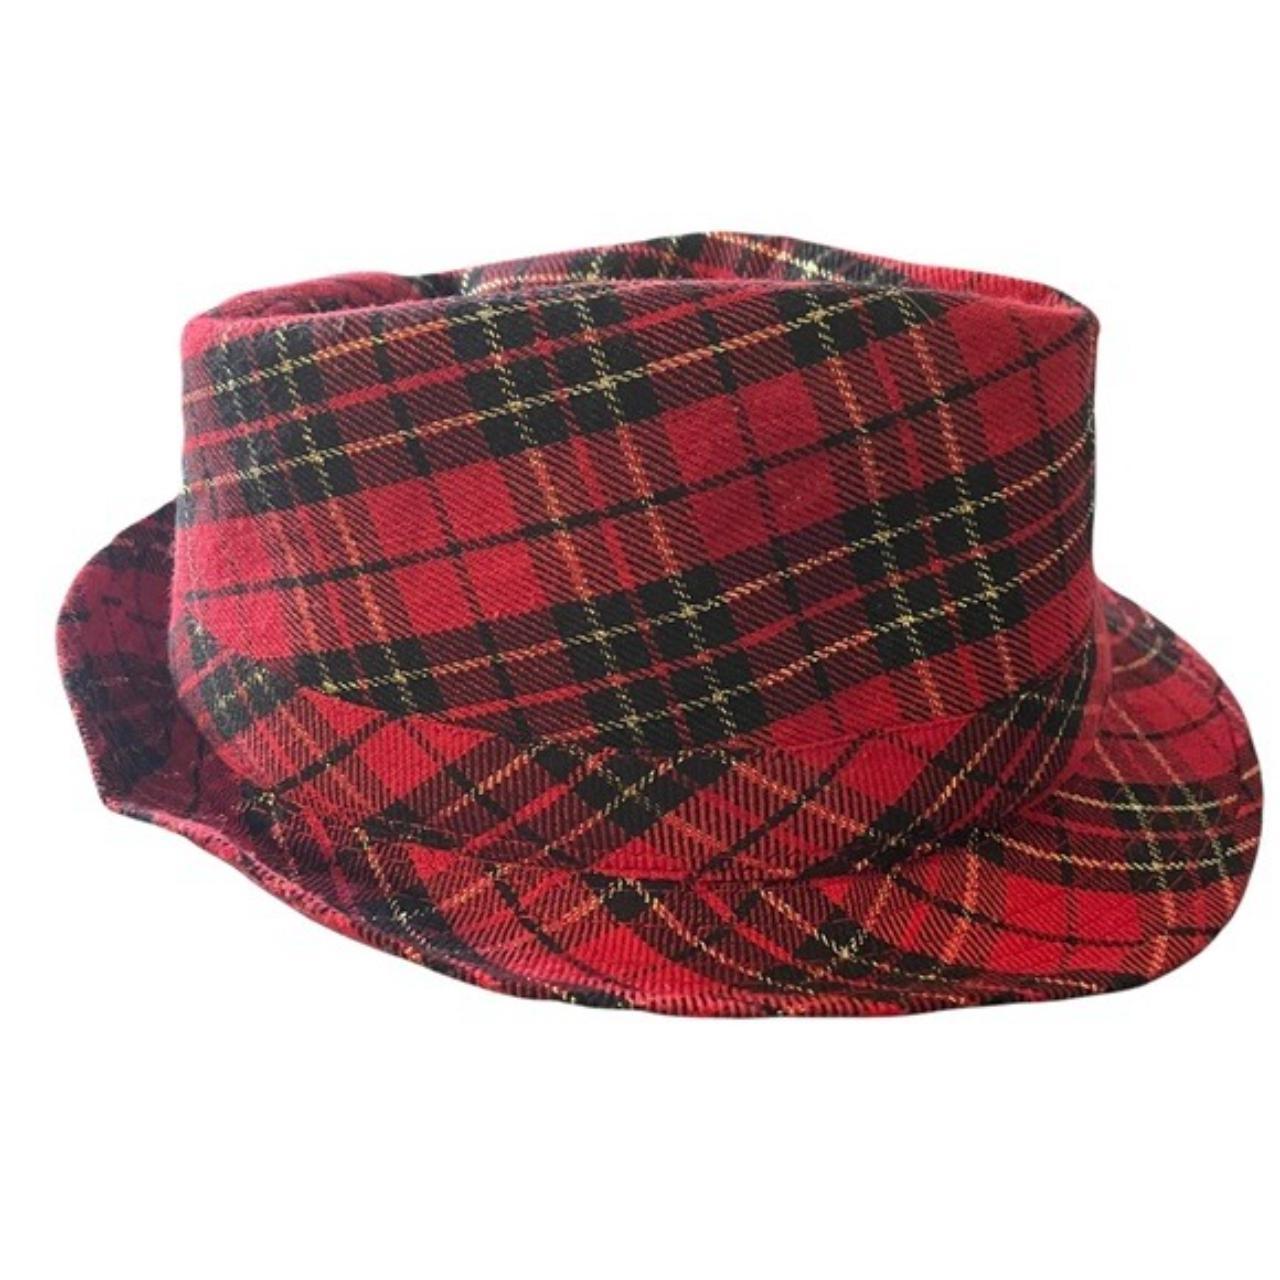 Product Image 2 - Vintage style Red plaid Christmas